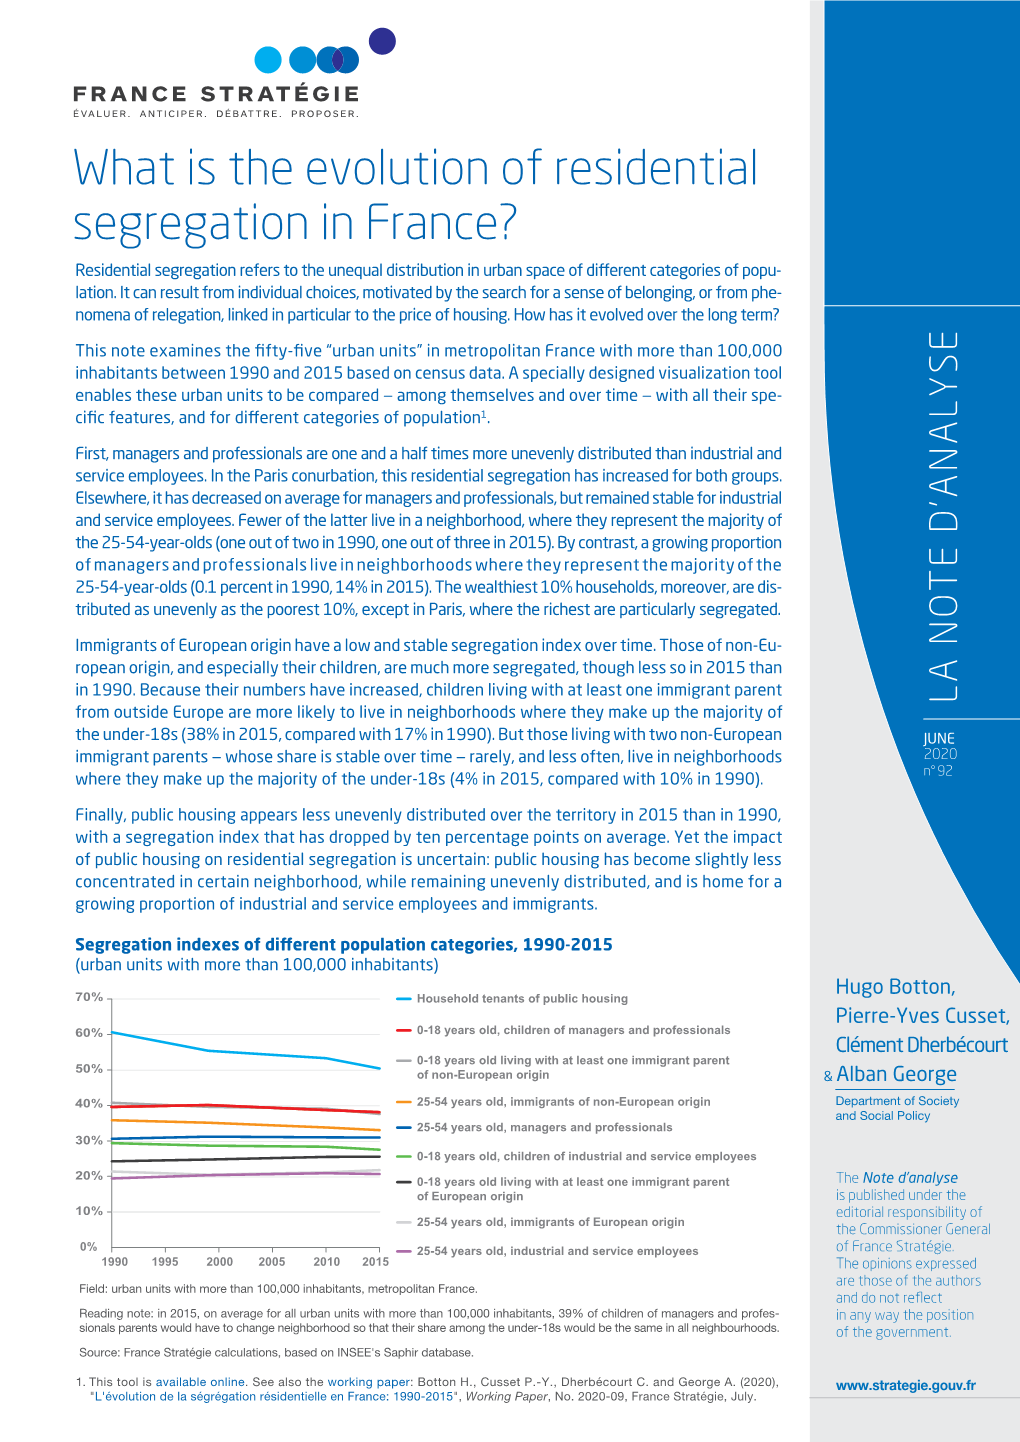 What Is the Evolution of Residential Segregation in France?